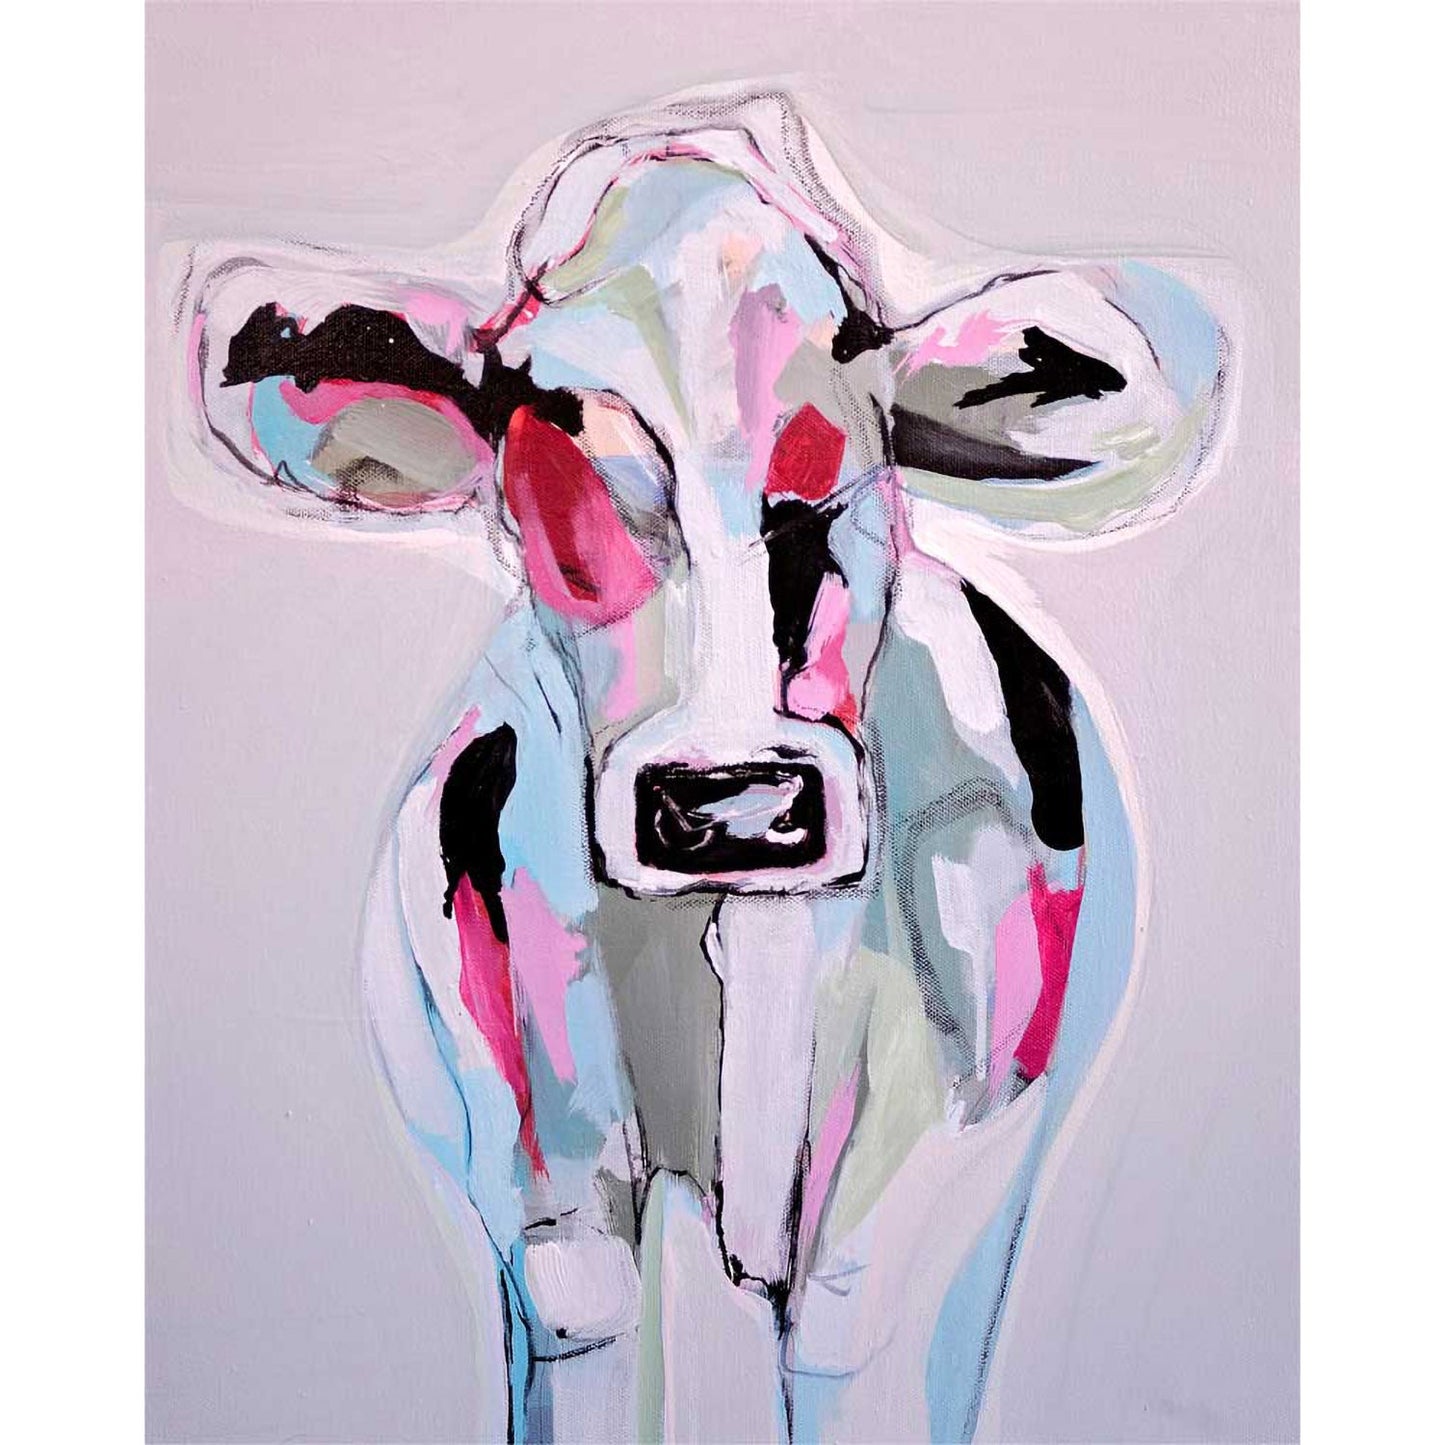 Lively Livestock - Cow Canvas Wall Art